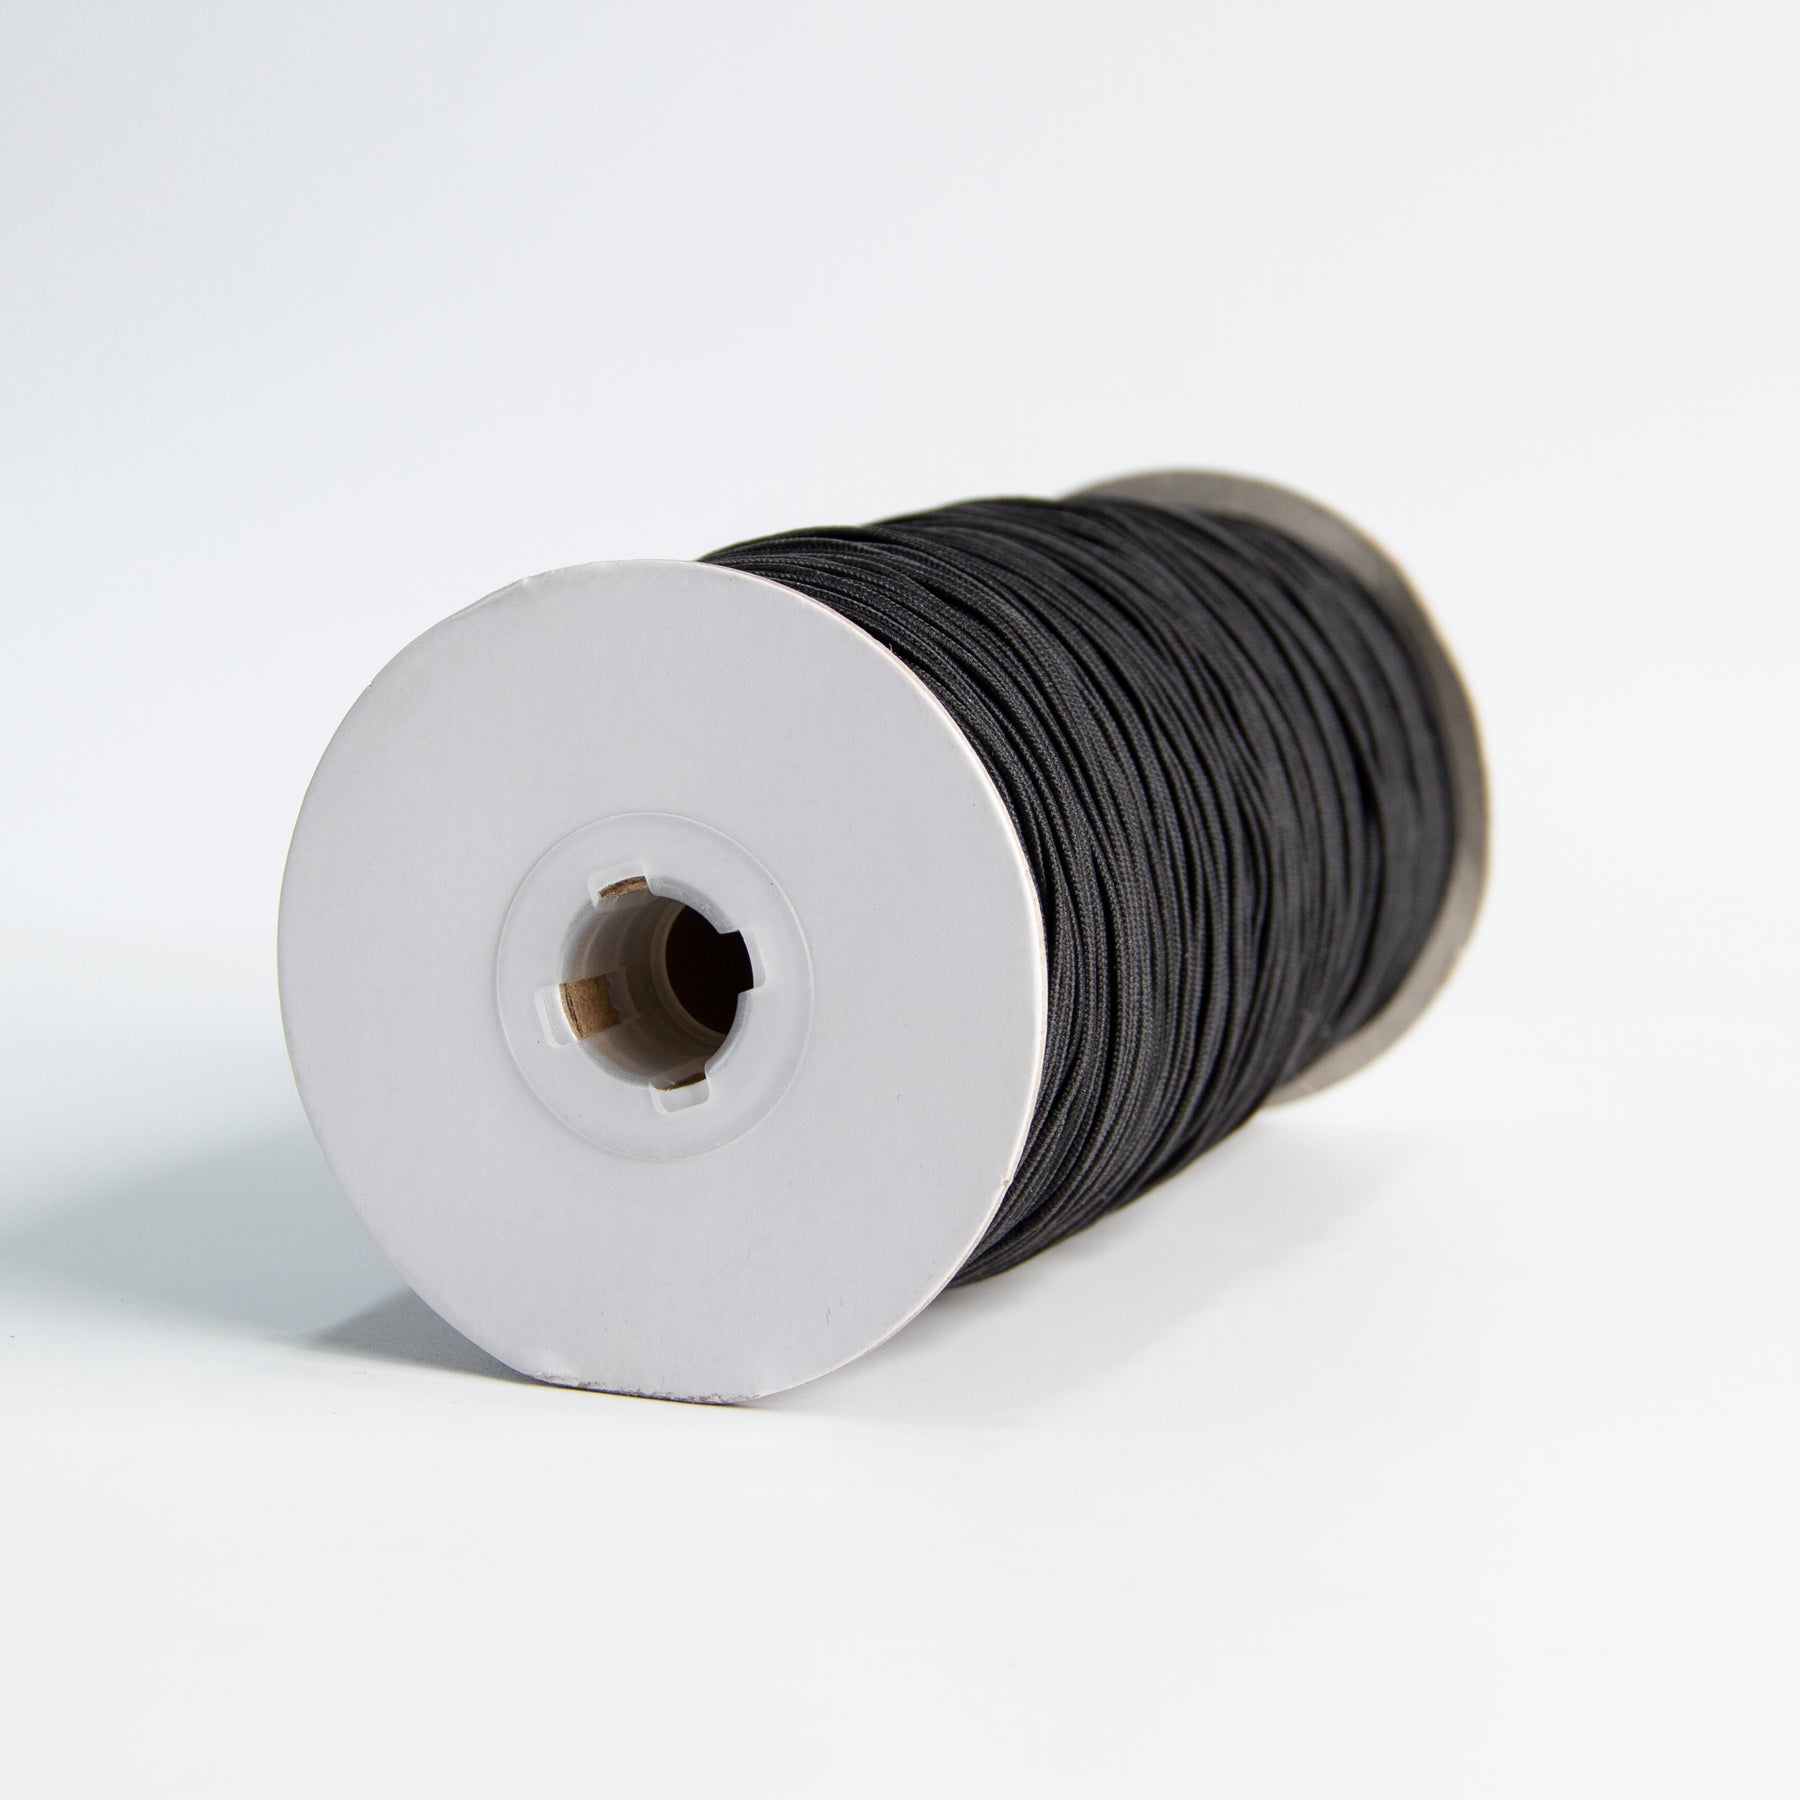 Sideview of silver conductive elastic cable in cone